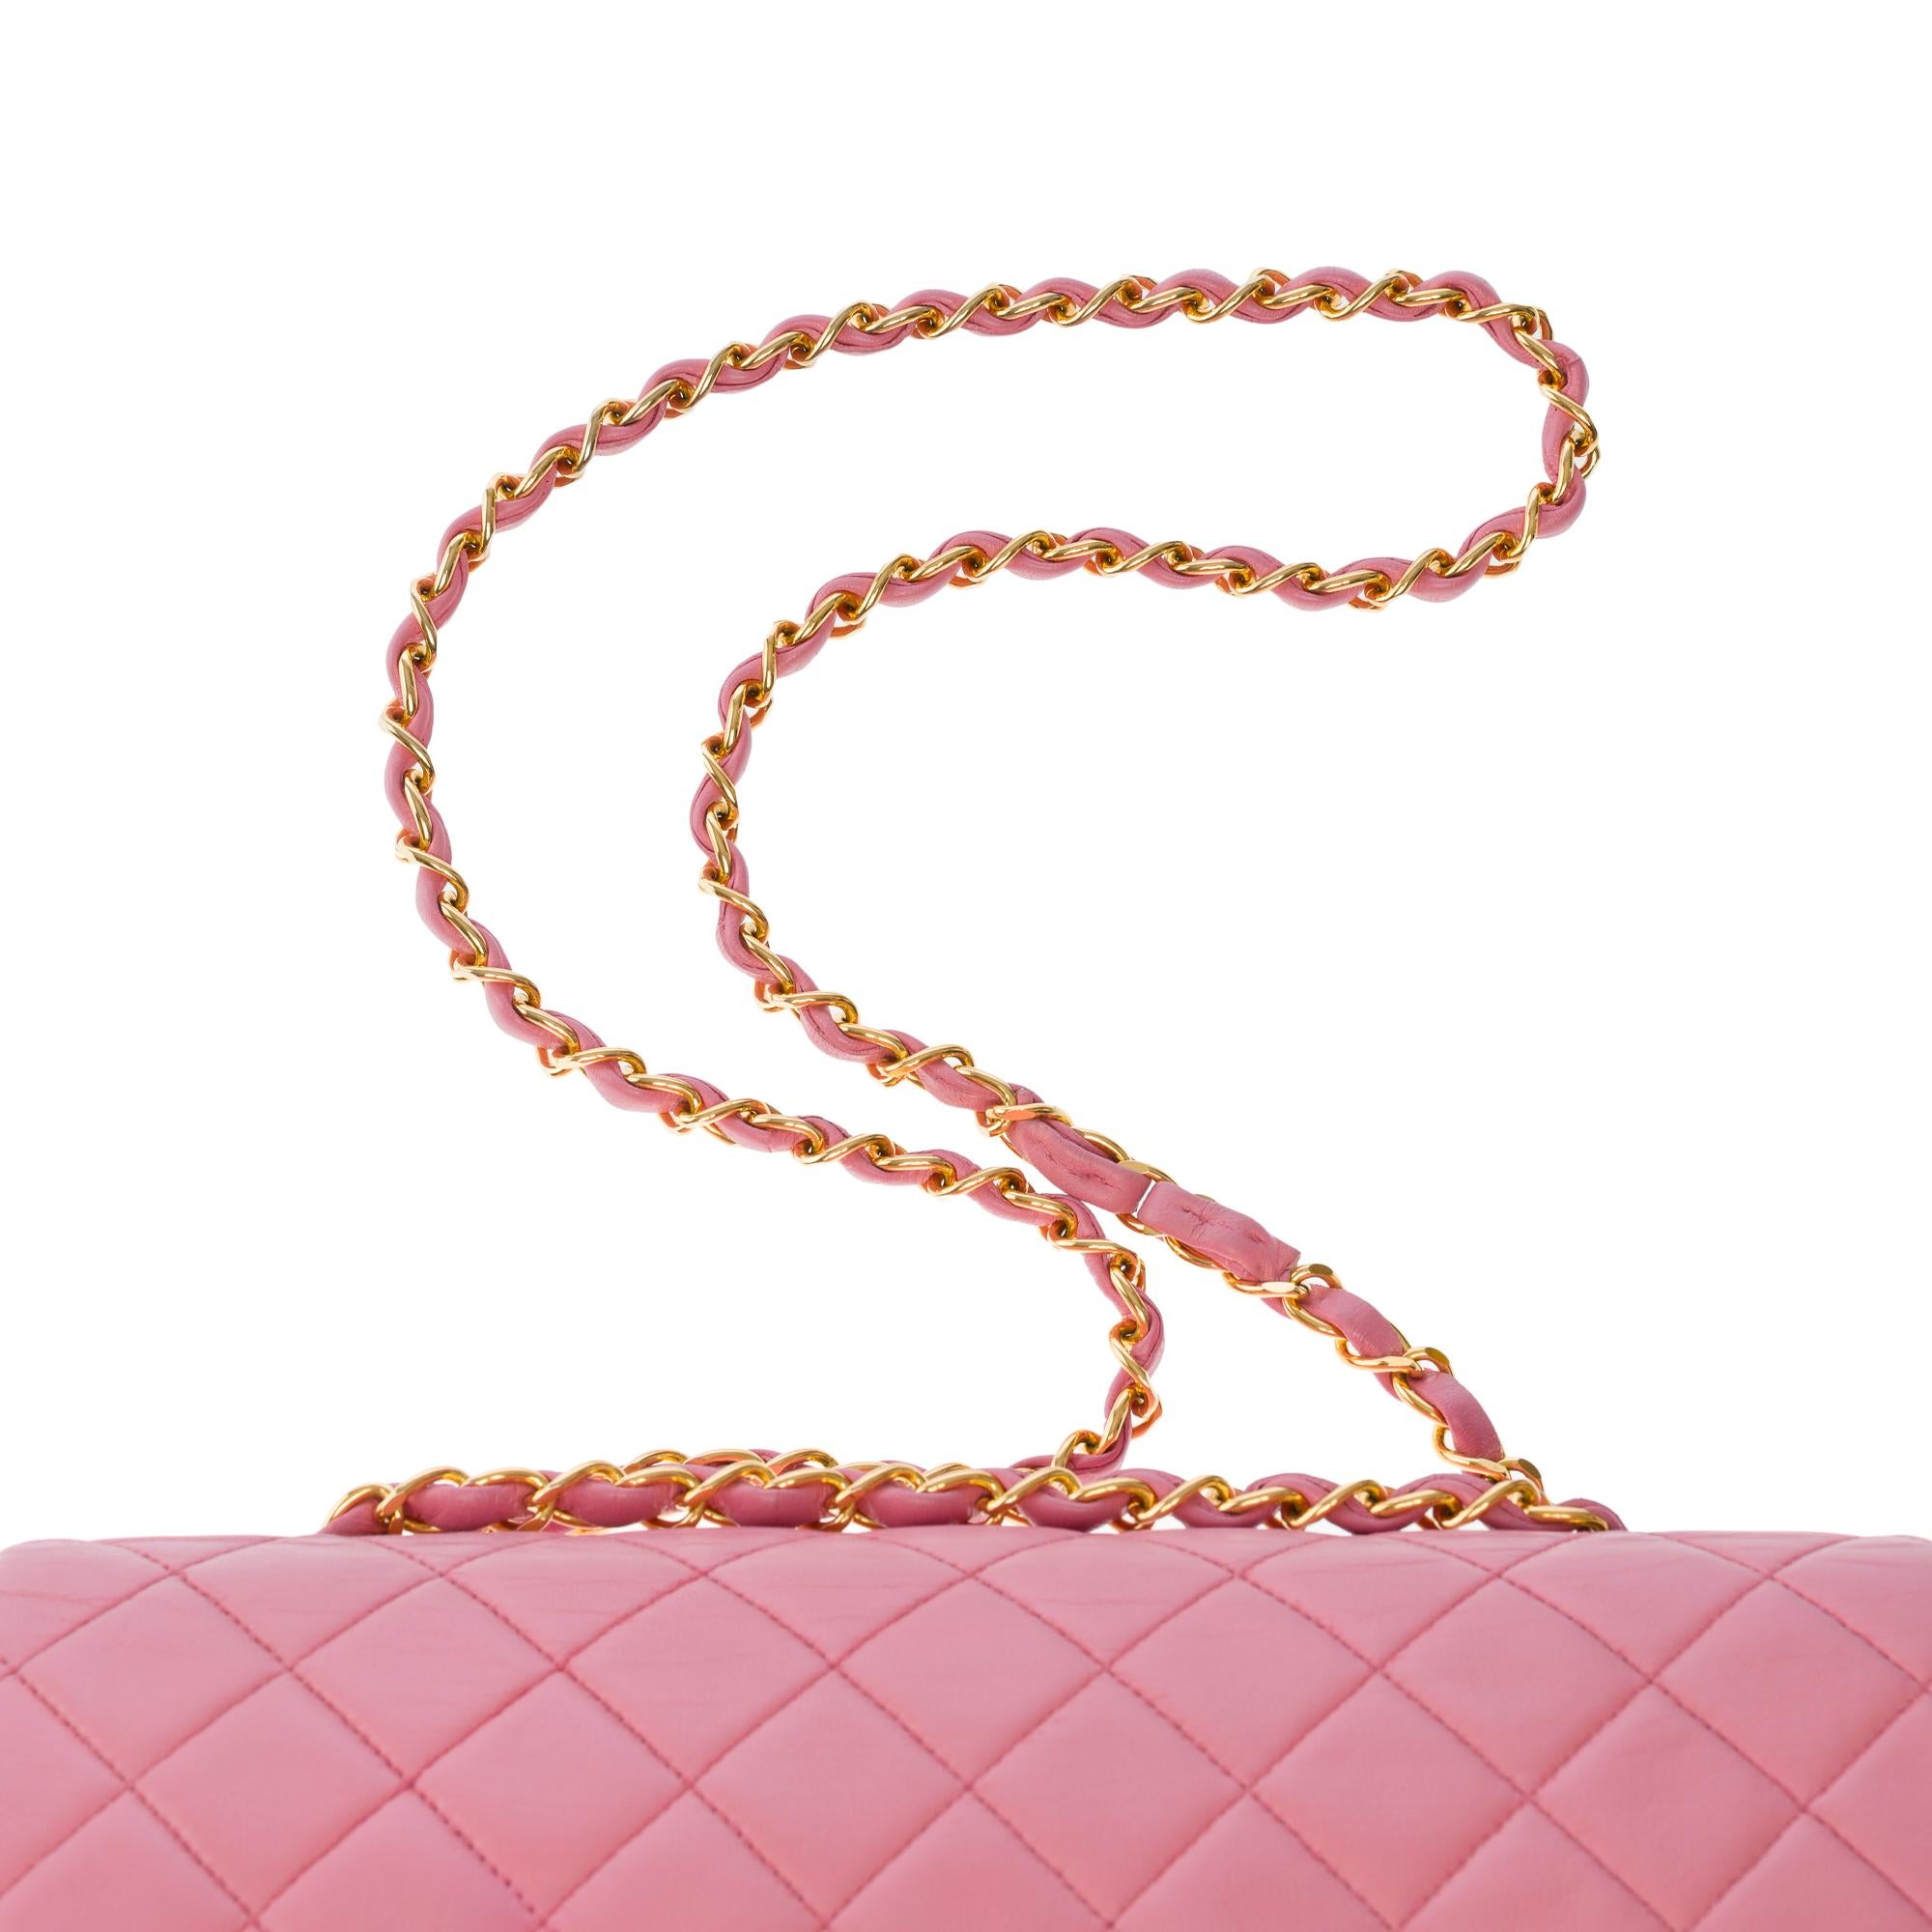 Chanel Timeless Medium double Flap shoulder bag in Pink quilted lambskin, GHW 7